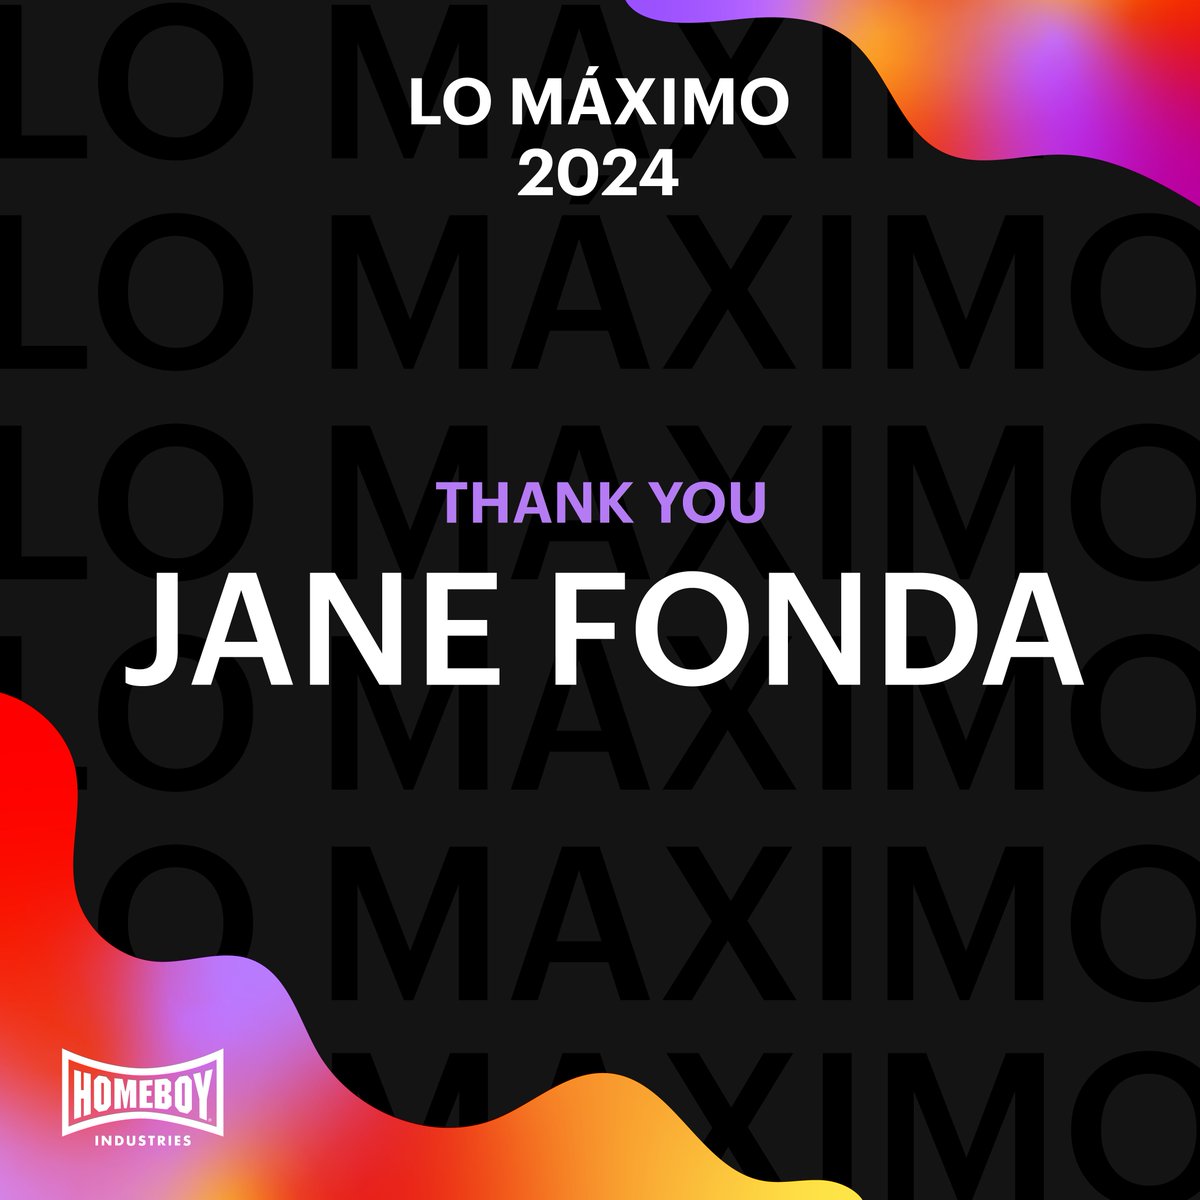 A HUGE shoutout and thank you to our dear friend, Board Member and host of Lo Máximo, Jane Fonda. Your unwavering support is truly inspiring and impacts the lives of many! We appreciate you.